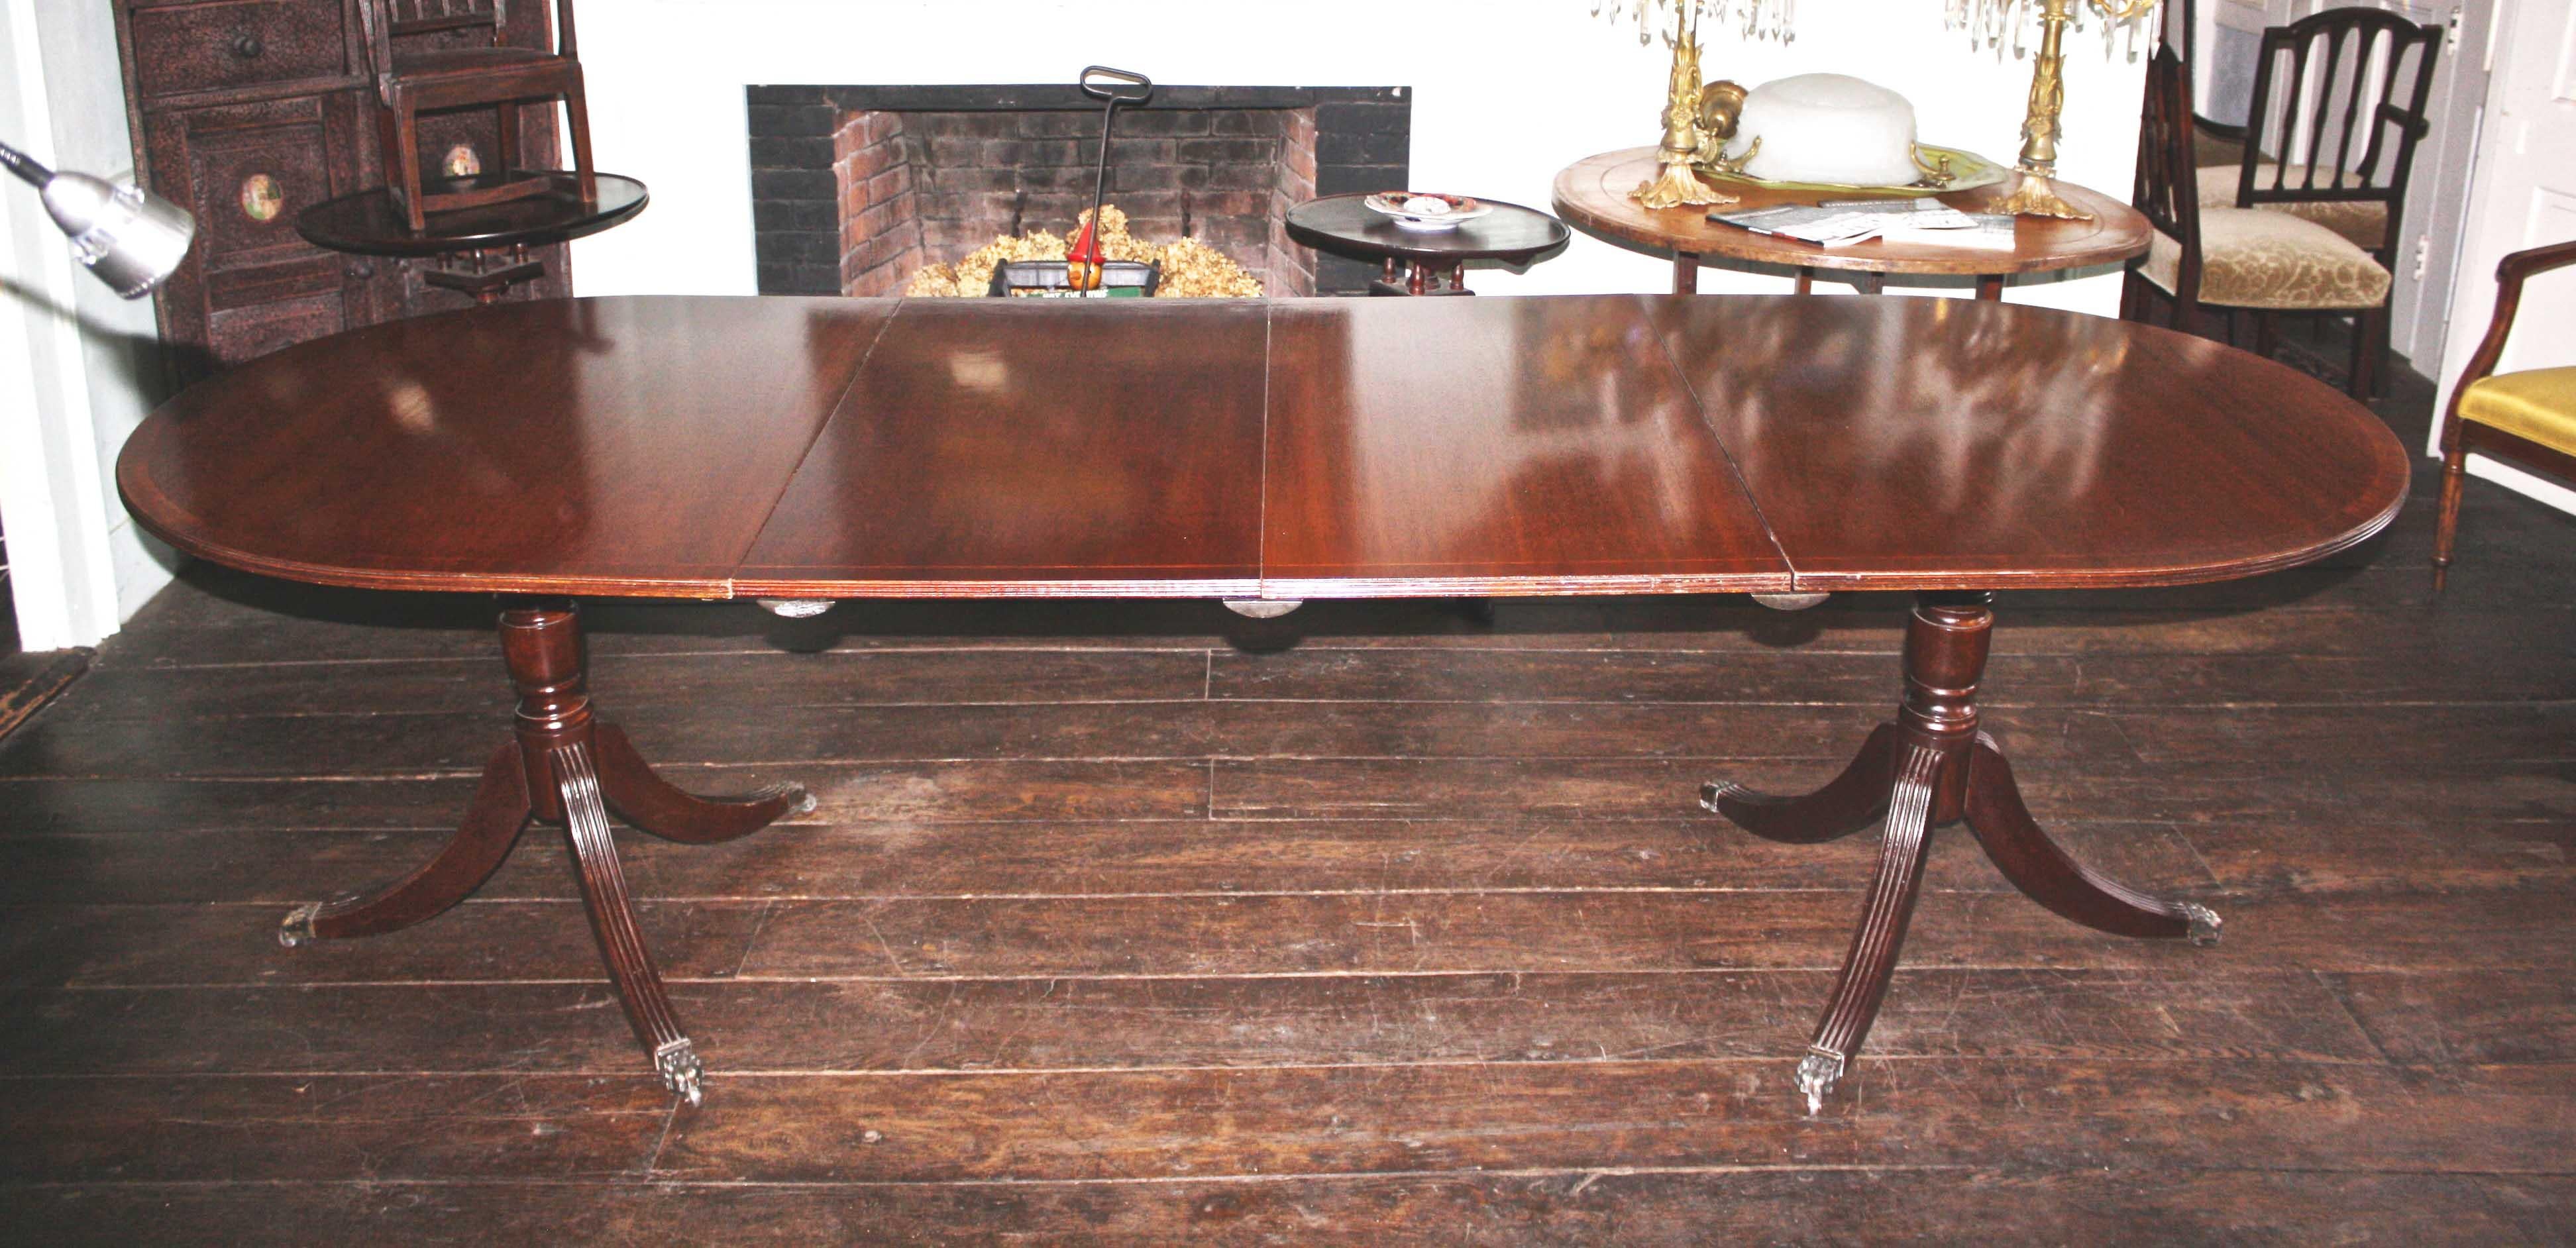 George III revival demilune-ended, banded with string inlay and reeded table-top edges.
Reeded legs, six brass paws with casters. Just 39 inches wide; the two leaves are each 
20 inches and provide perfect comfortable seating for eight. An ideally